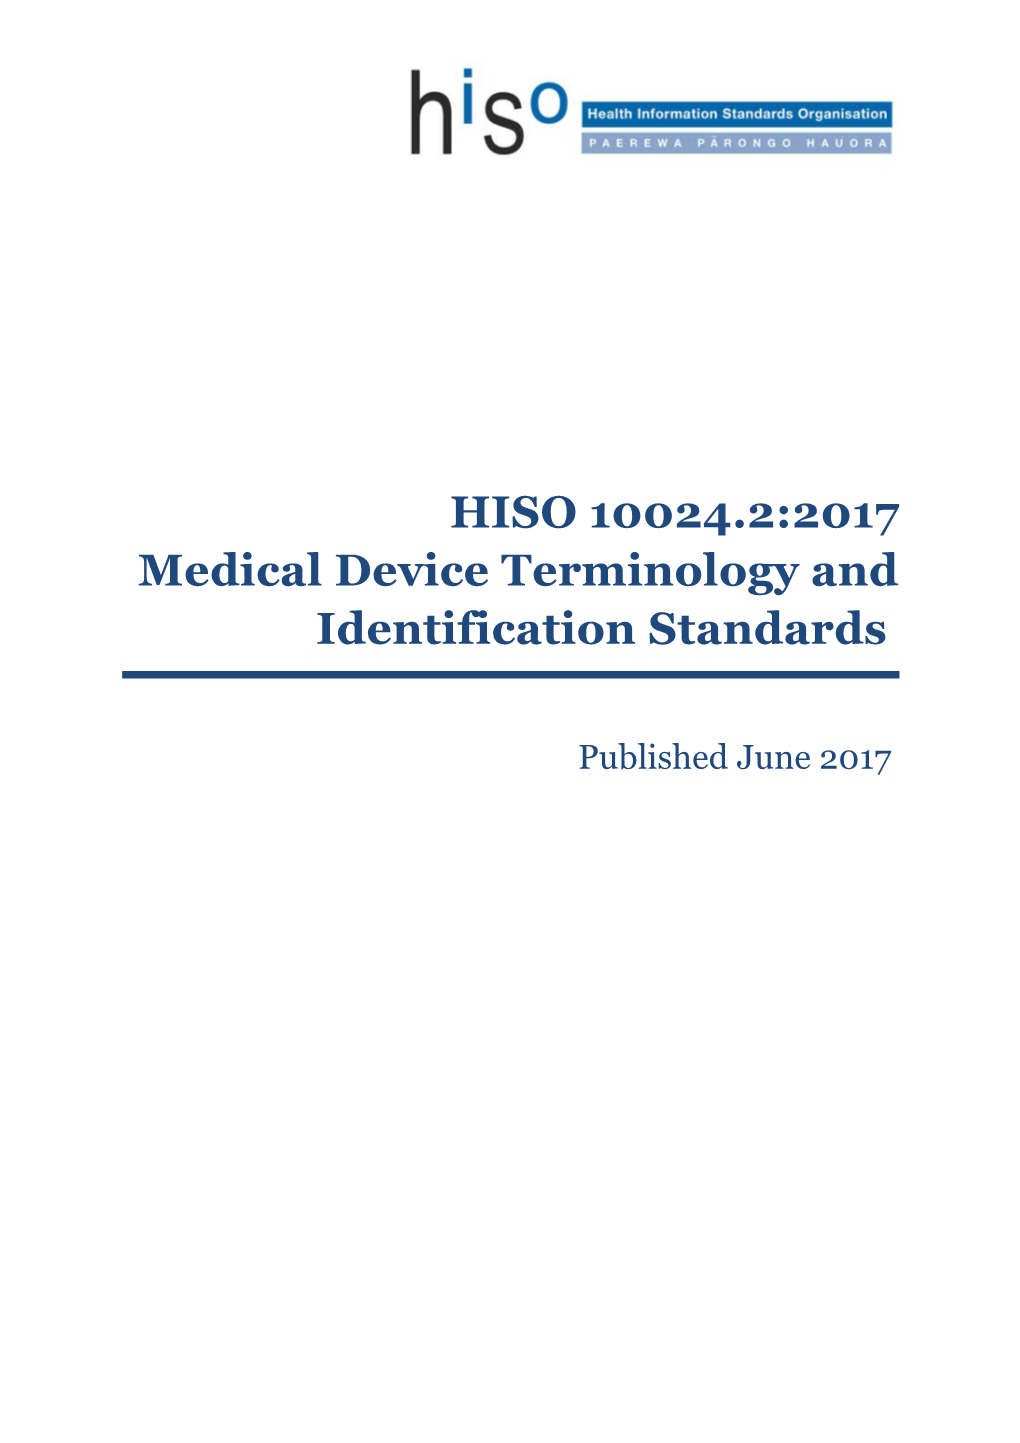 HISO 10024.2:2017 Medical Device Terminology and Identification Standards